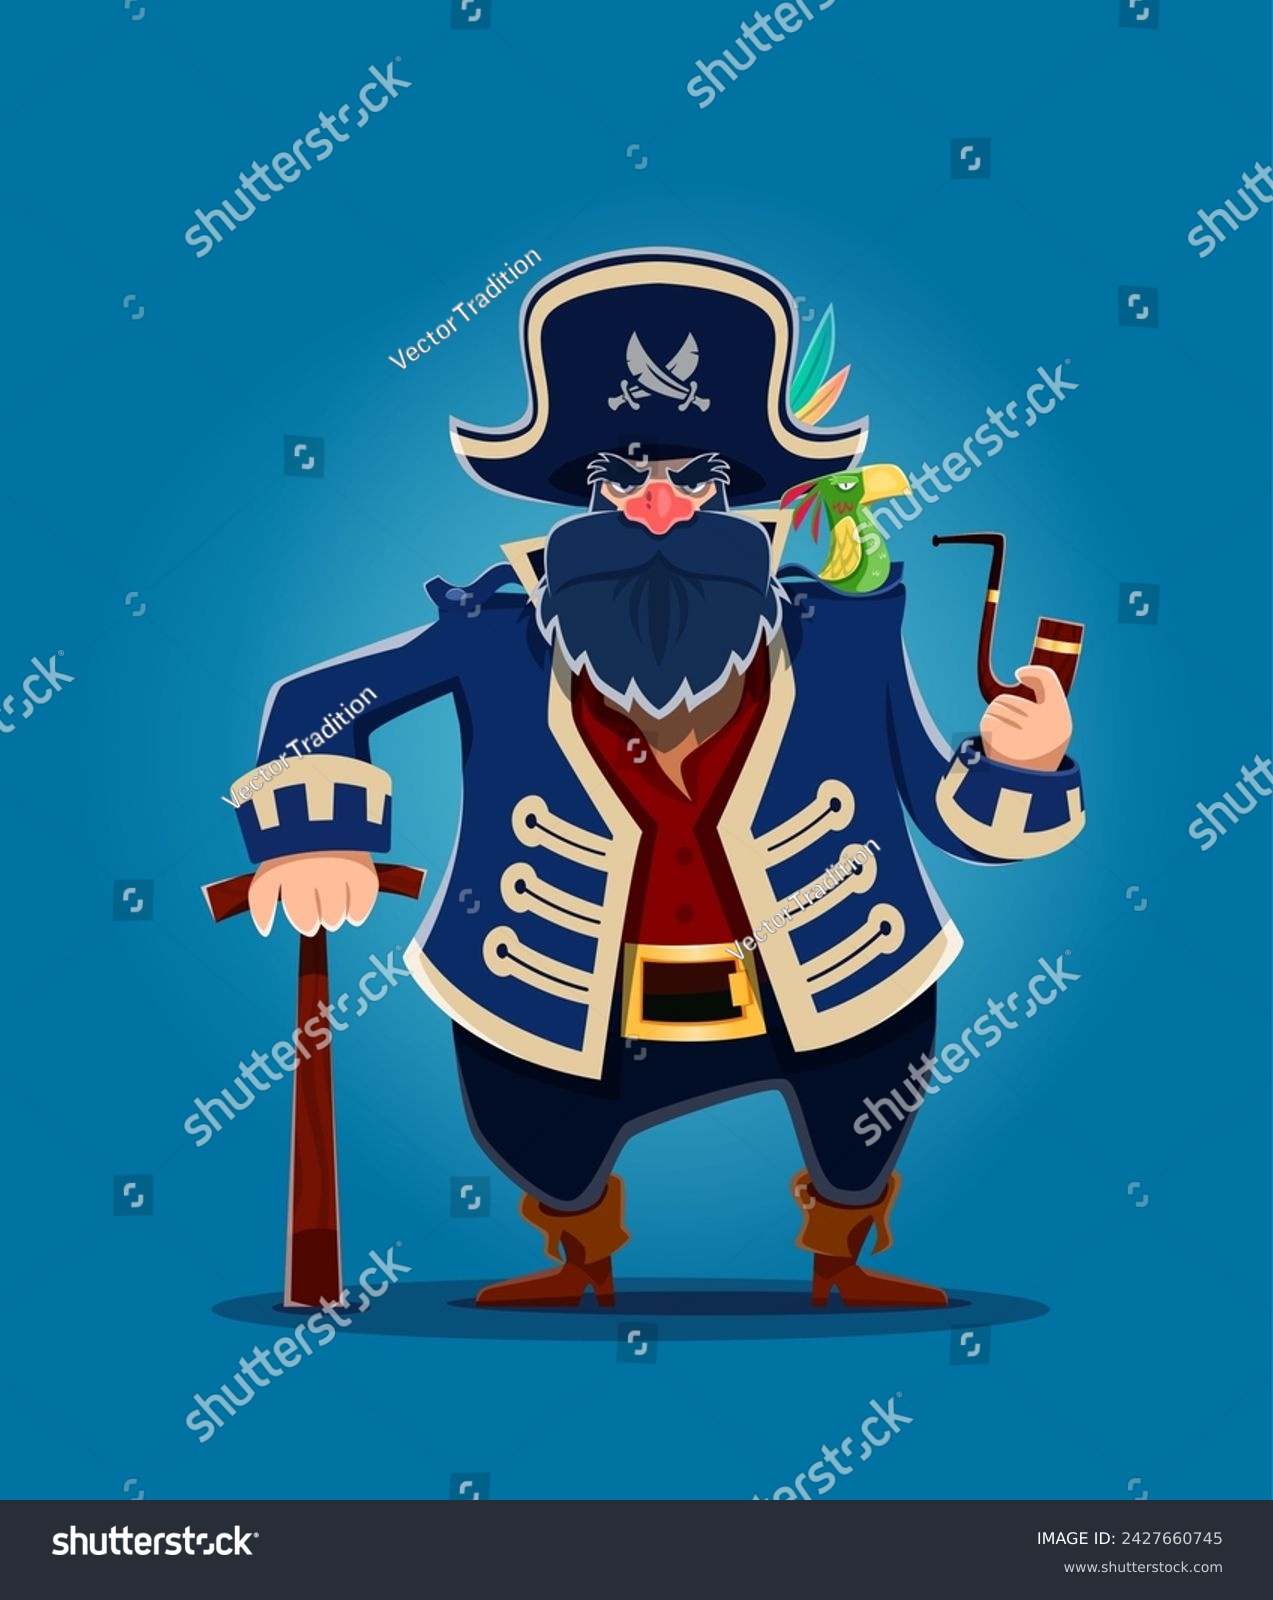 SVG of Cartoon old pirate captain. Corsair sailor character with smoking pipe and parrot. Funny pirate captain vector personage with blue beard. Sea robber or buccaneer sailor in corsair jacket, tricorn hat svg